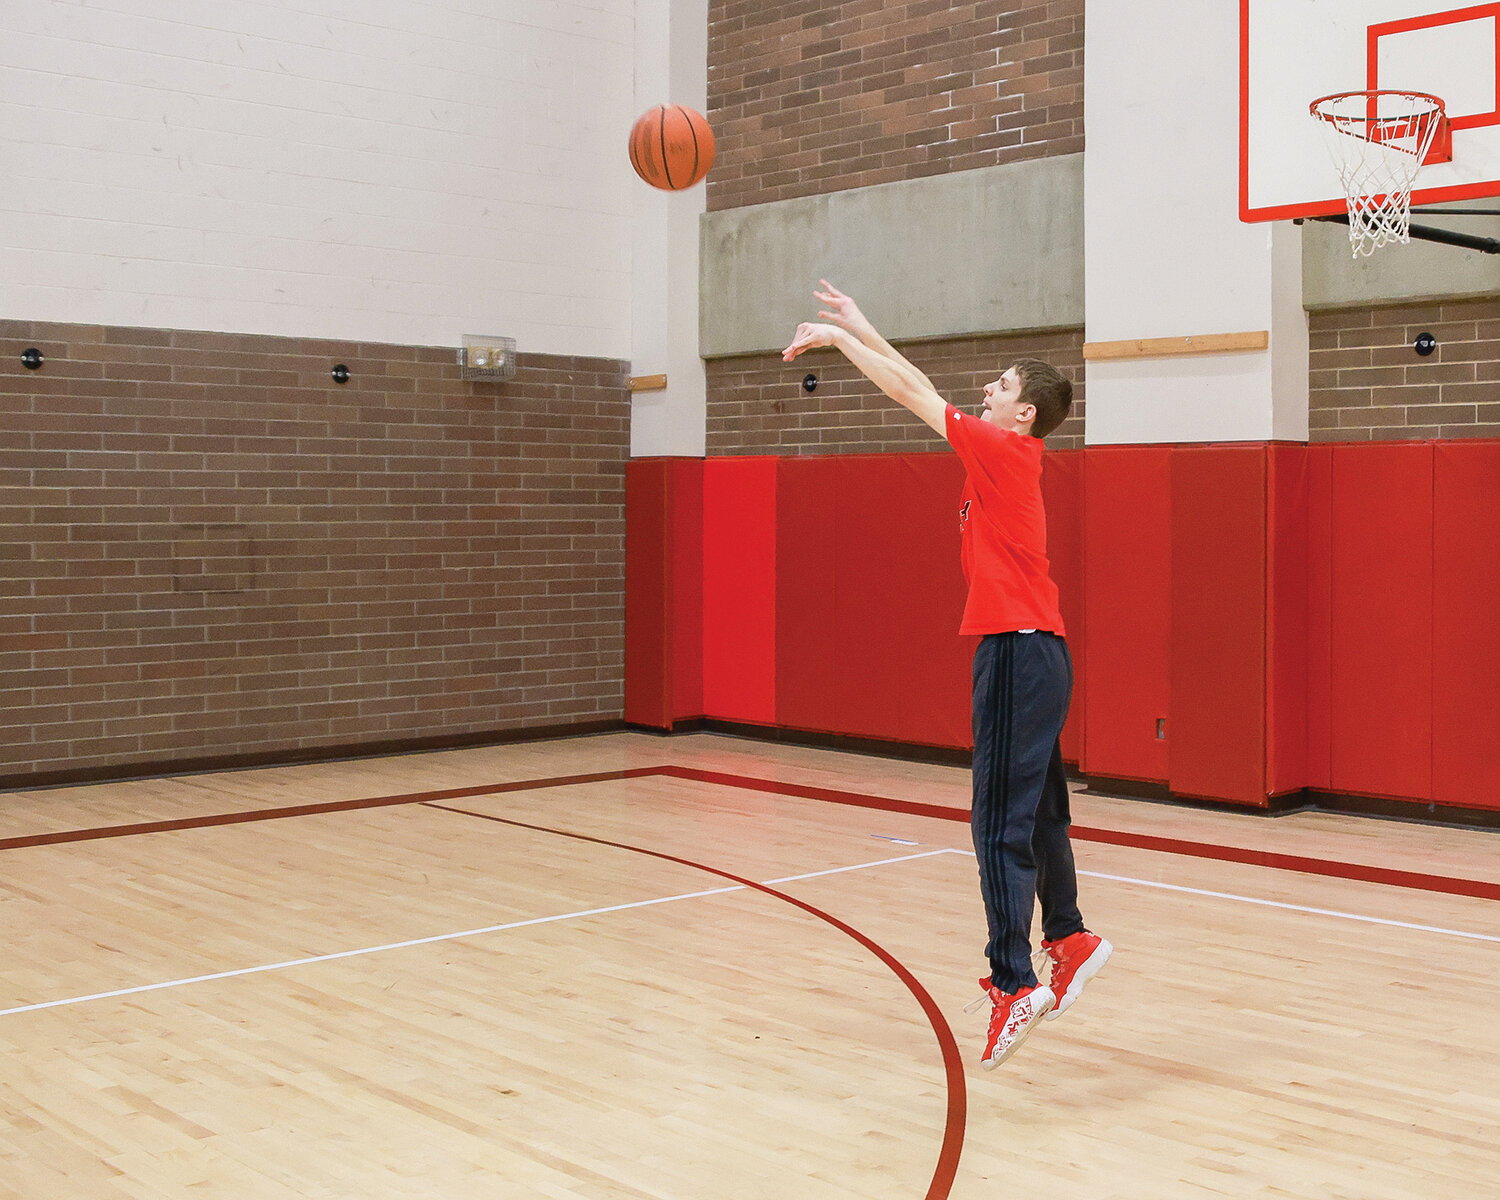 Prairie High School unified basketball athlete Luke Matey attempts a shot in practice on Tuesday, Jan. 30.